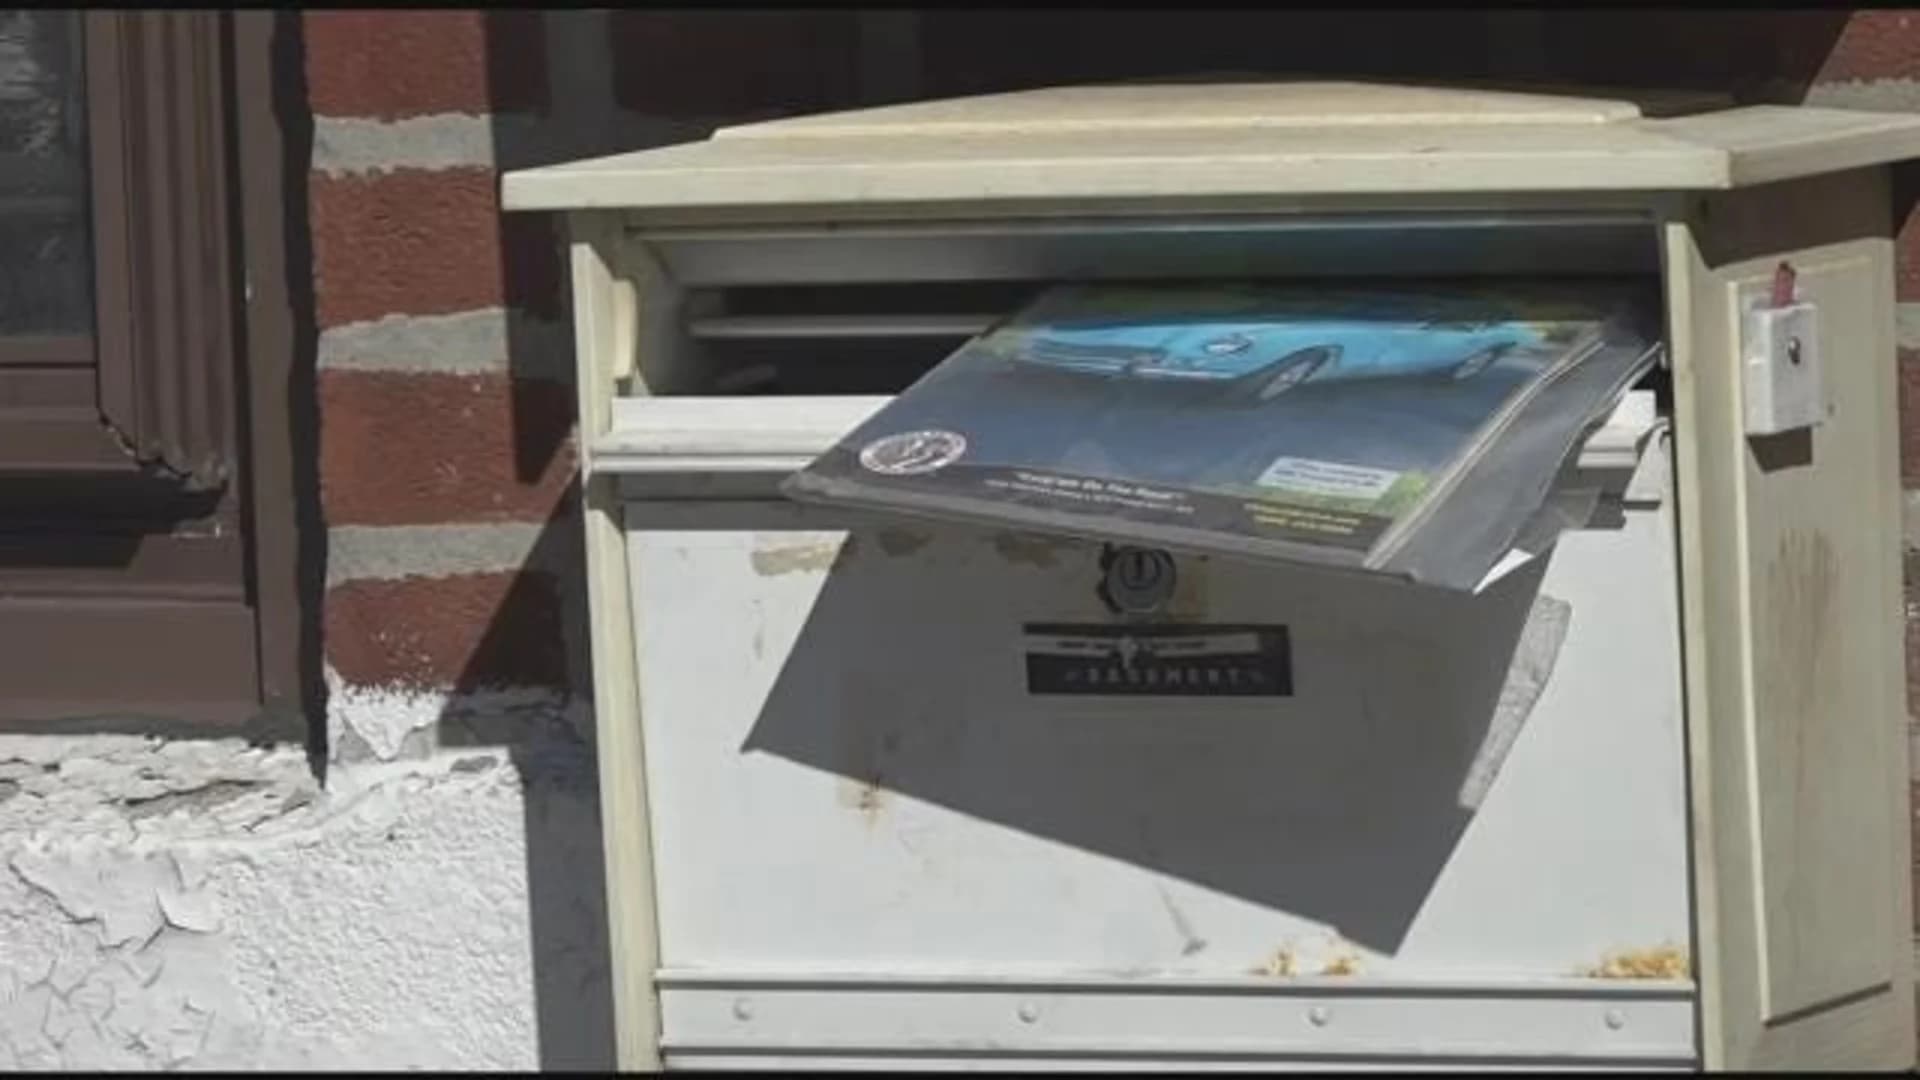 ‘It's a headache.’ Soundview man says he misses bills due to inconsistent mail delivery